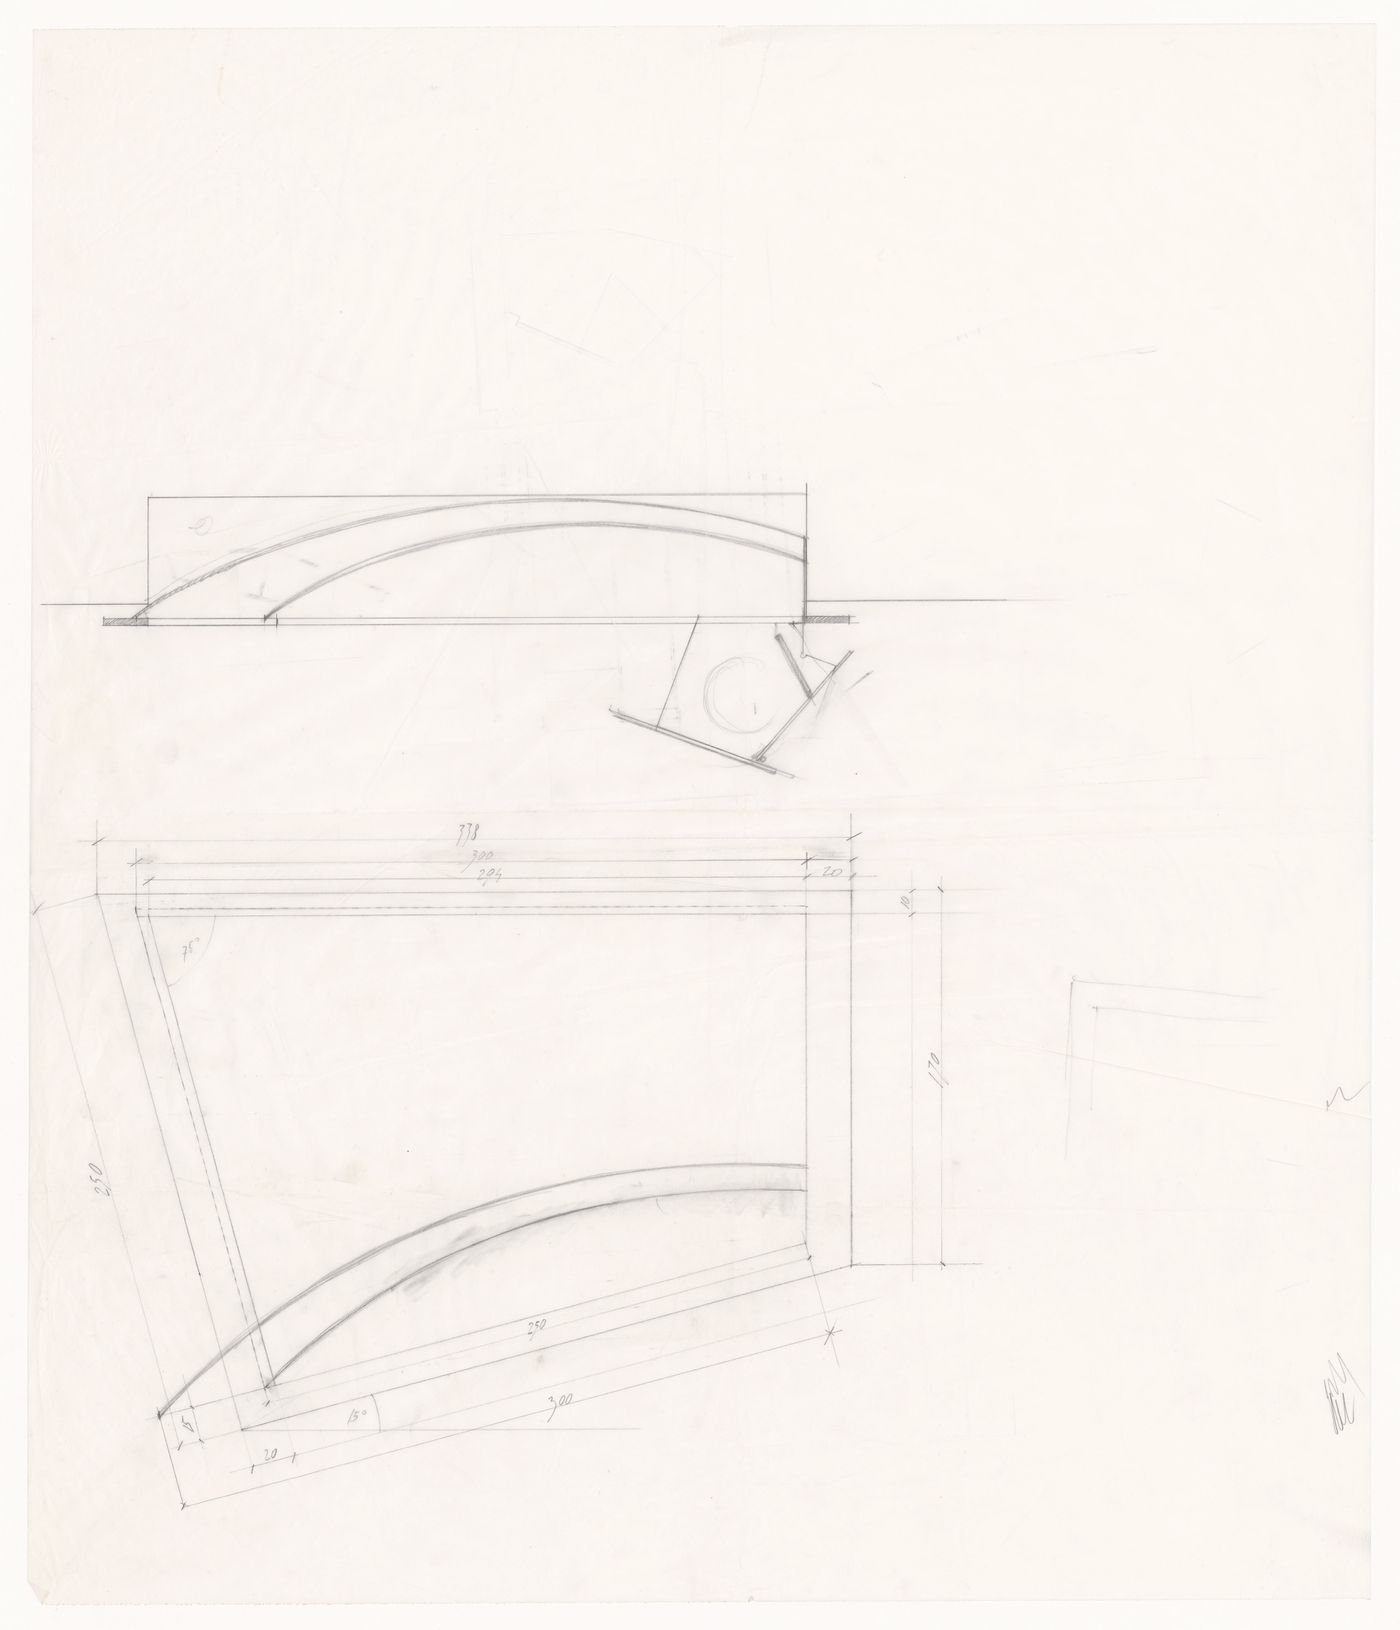 Section and plan for Casa Frea, Milan, Italy